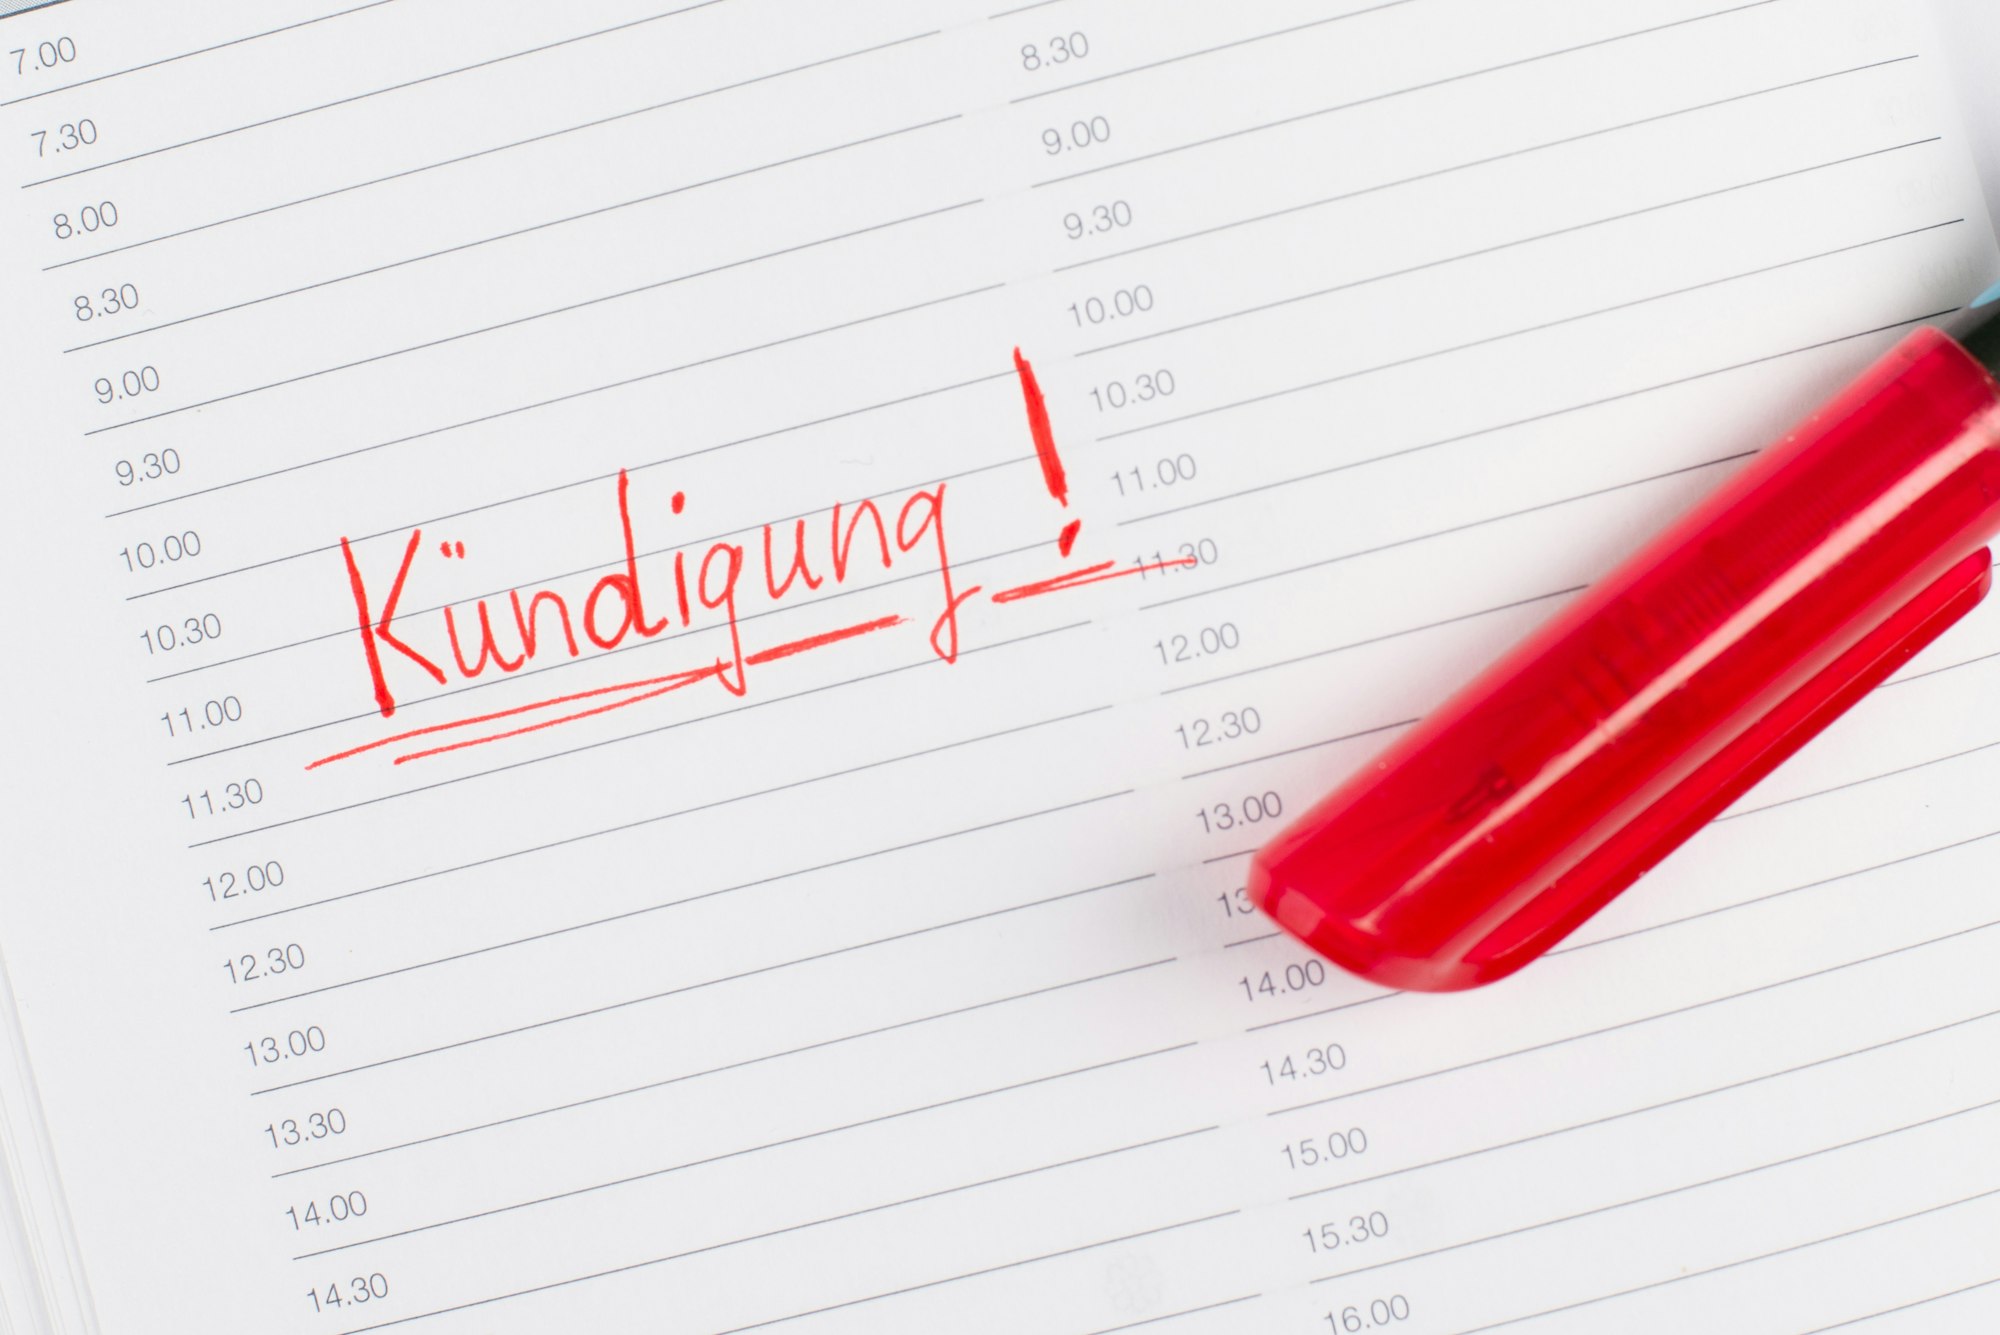 Termination is standing in german language in a calendar, red color and pen, fired from job